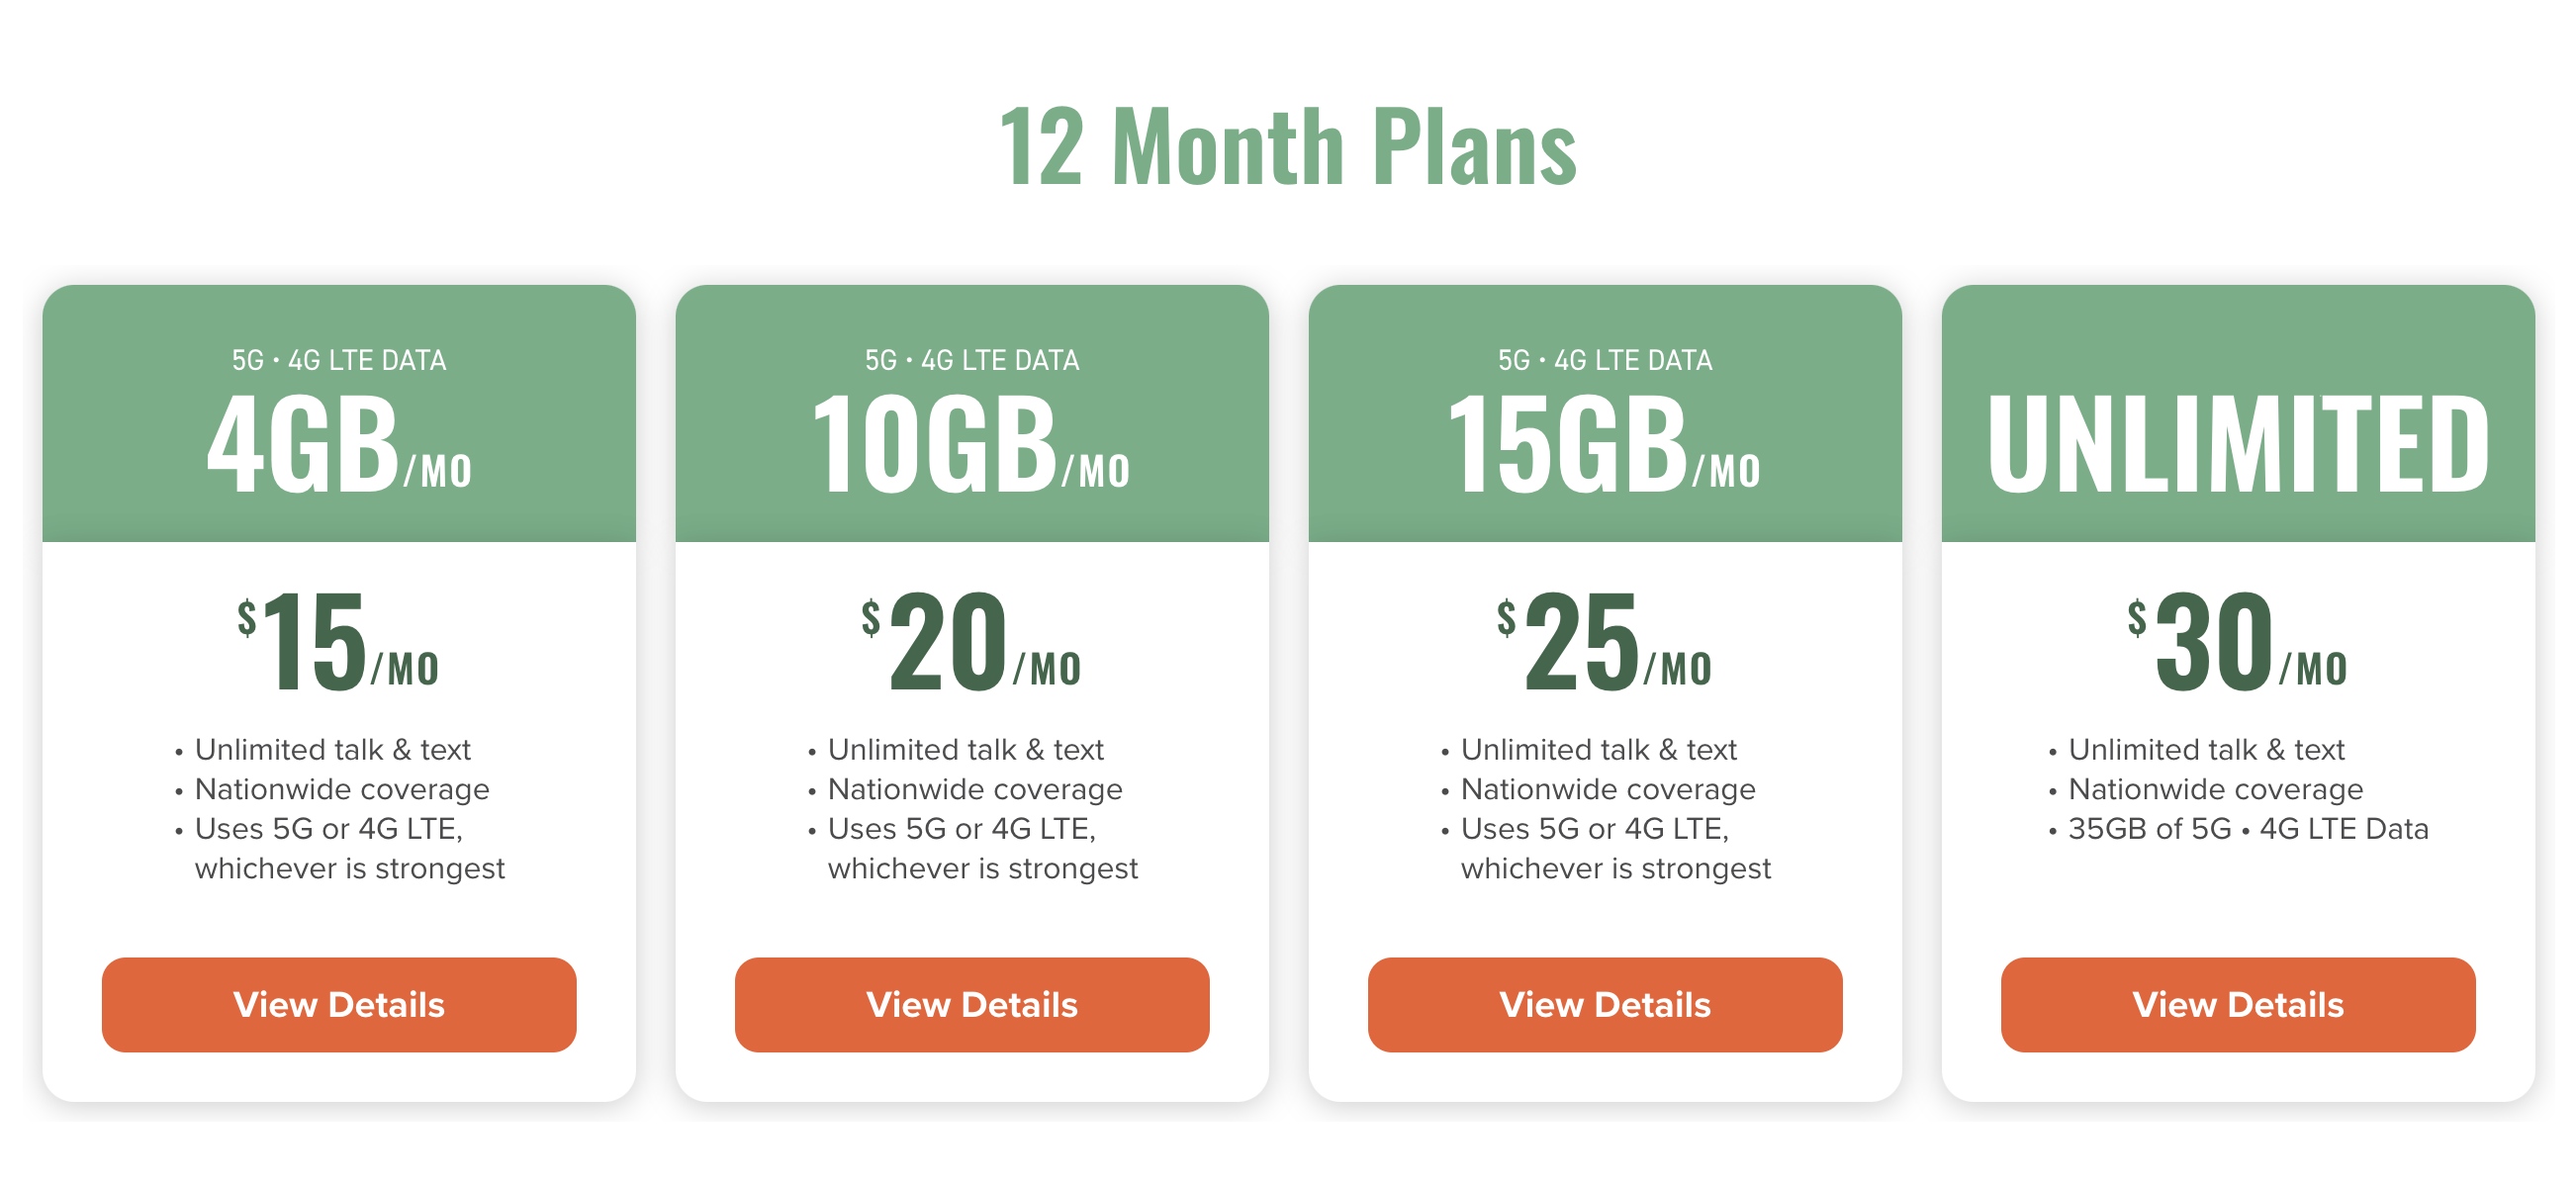 Mint Mobile 12-month plan pricing